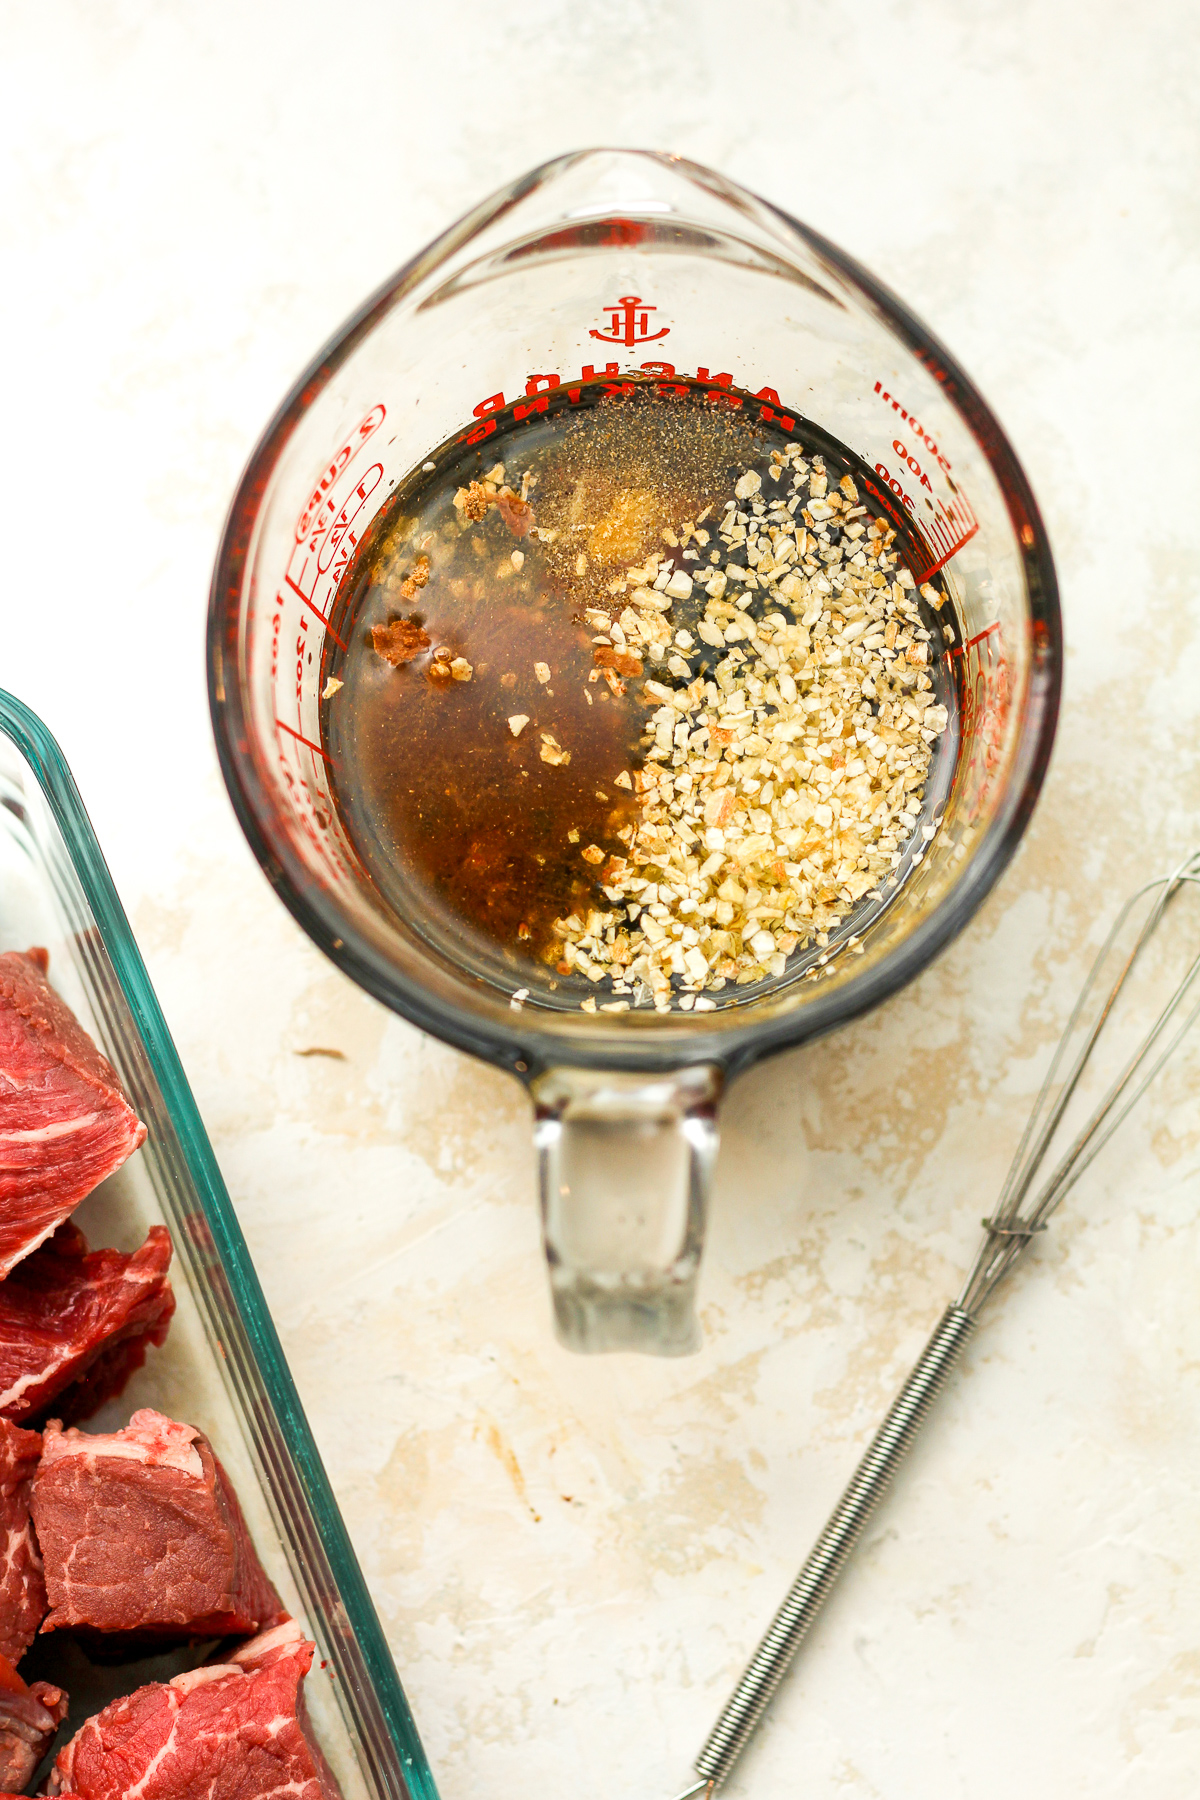 A measuring cup of the steak marinade.